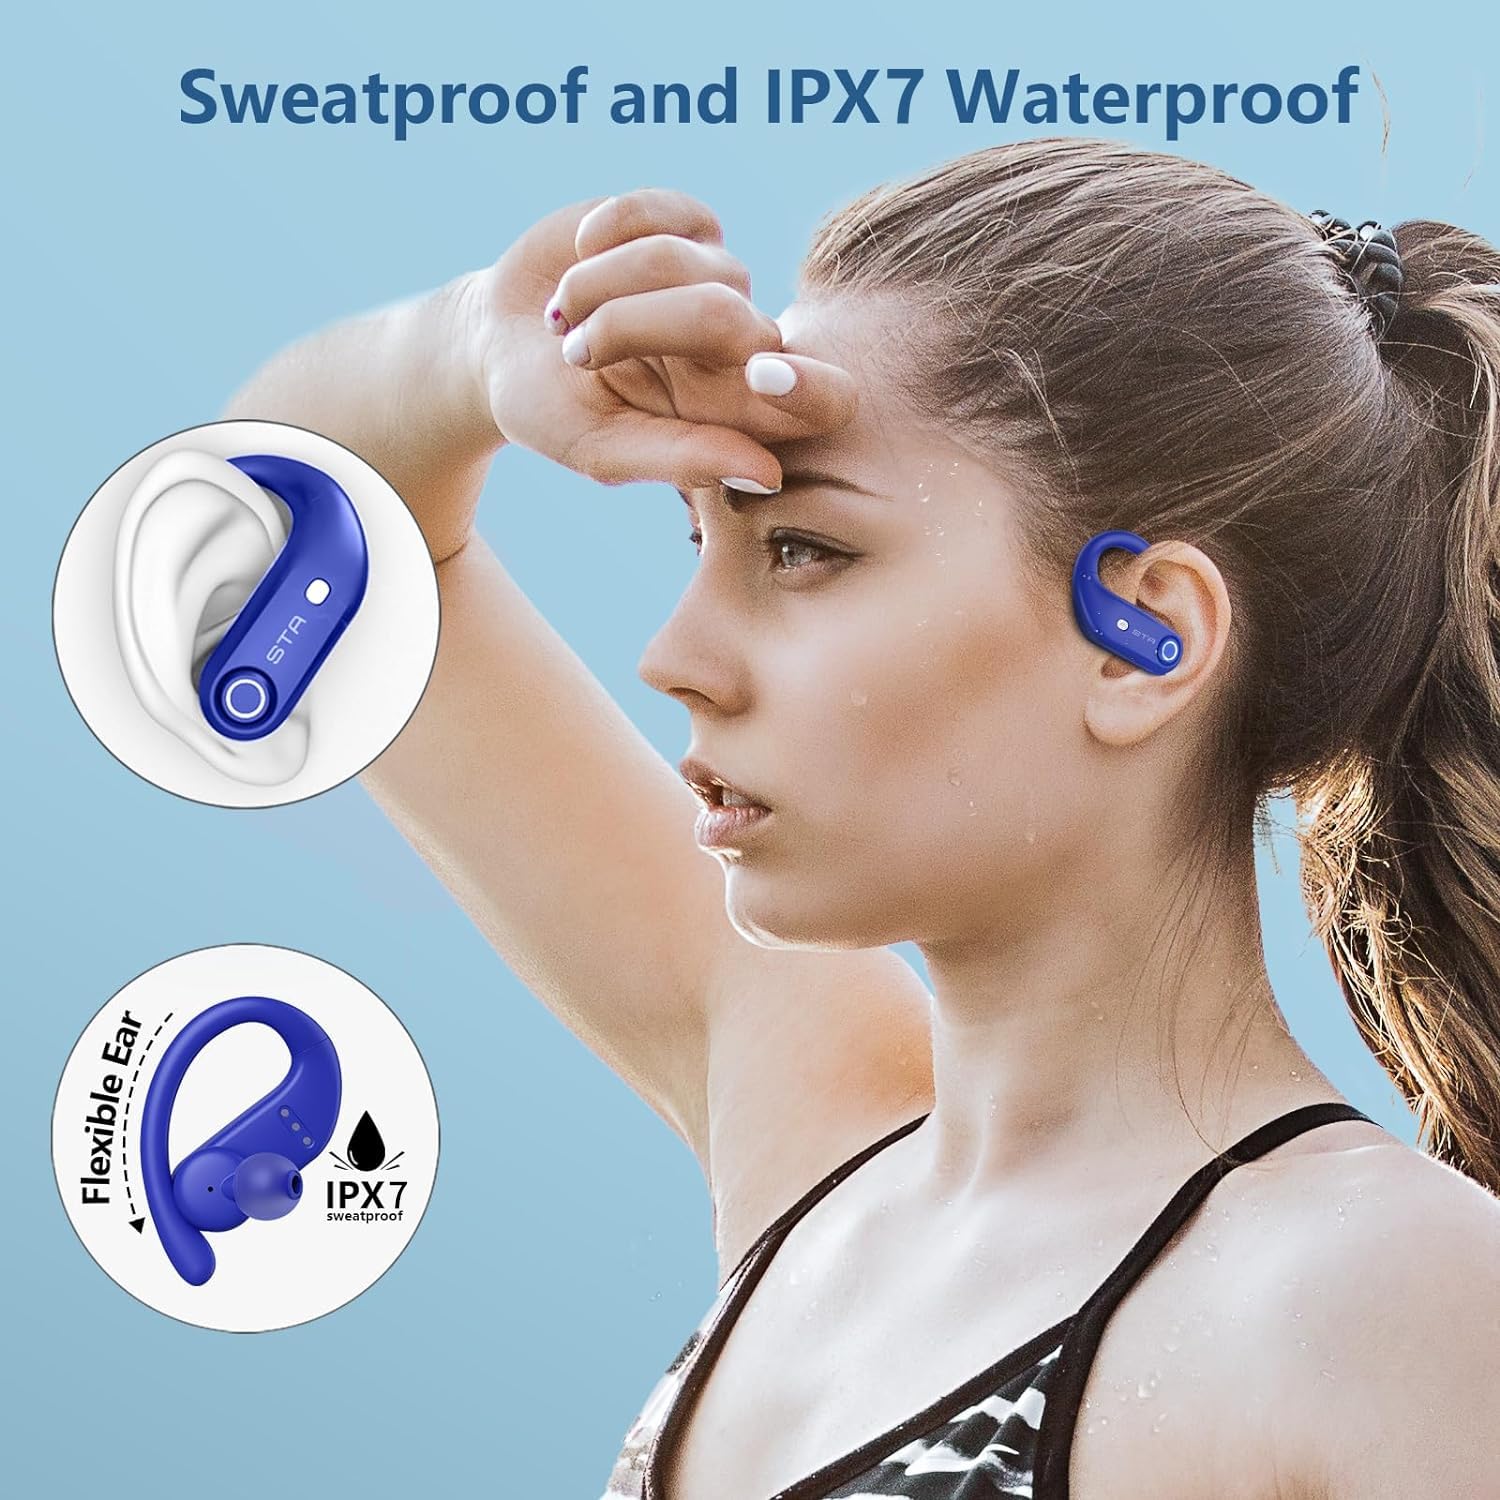 Wireless Earbuds Bluetooth Headphones 130H Playback 4-Mic HD Call IP7 Waterproof Ear Buds in Ear Sport LED Display Earphones with Earhooks for Running Workout Gym Phone Laptop TV Computer (Blue)